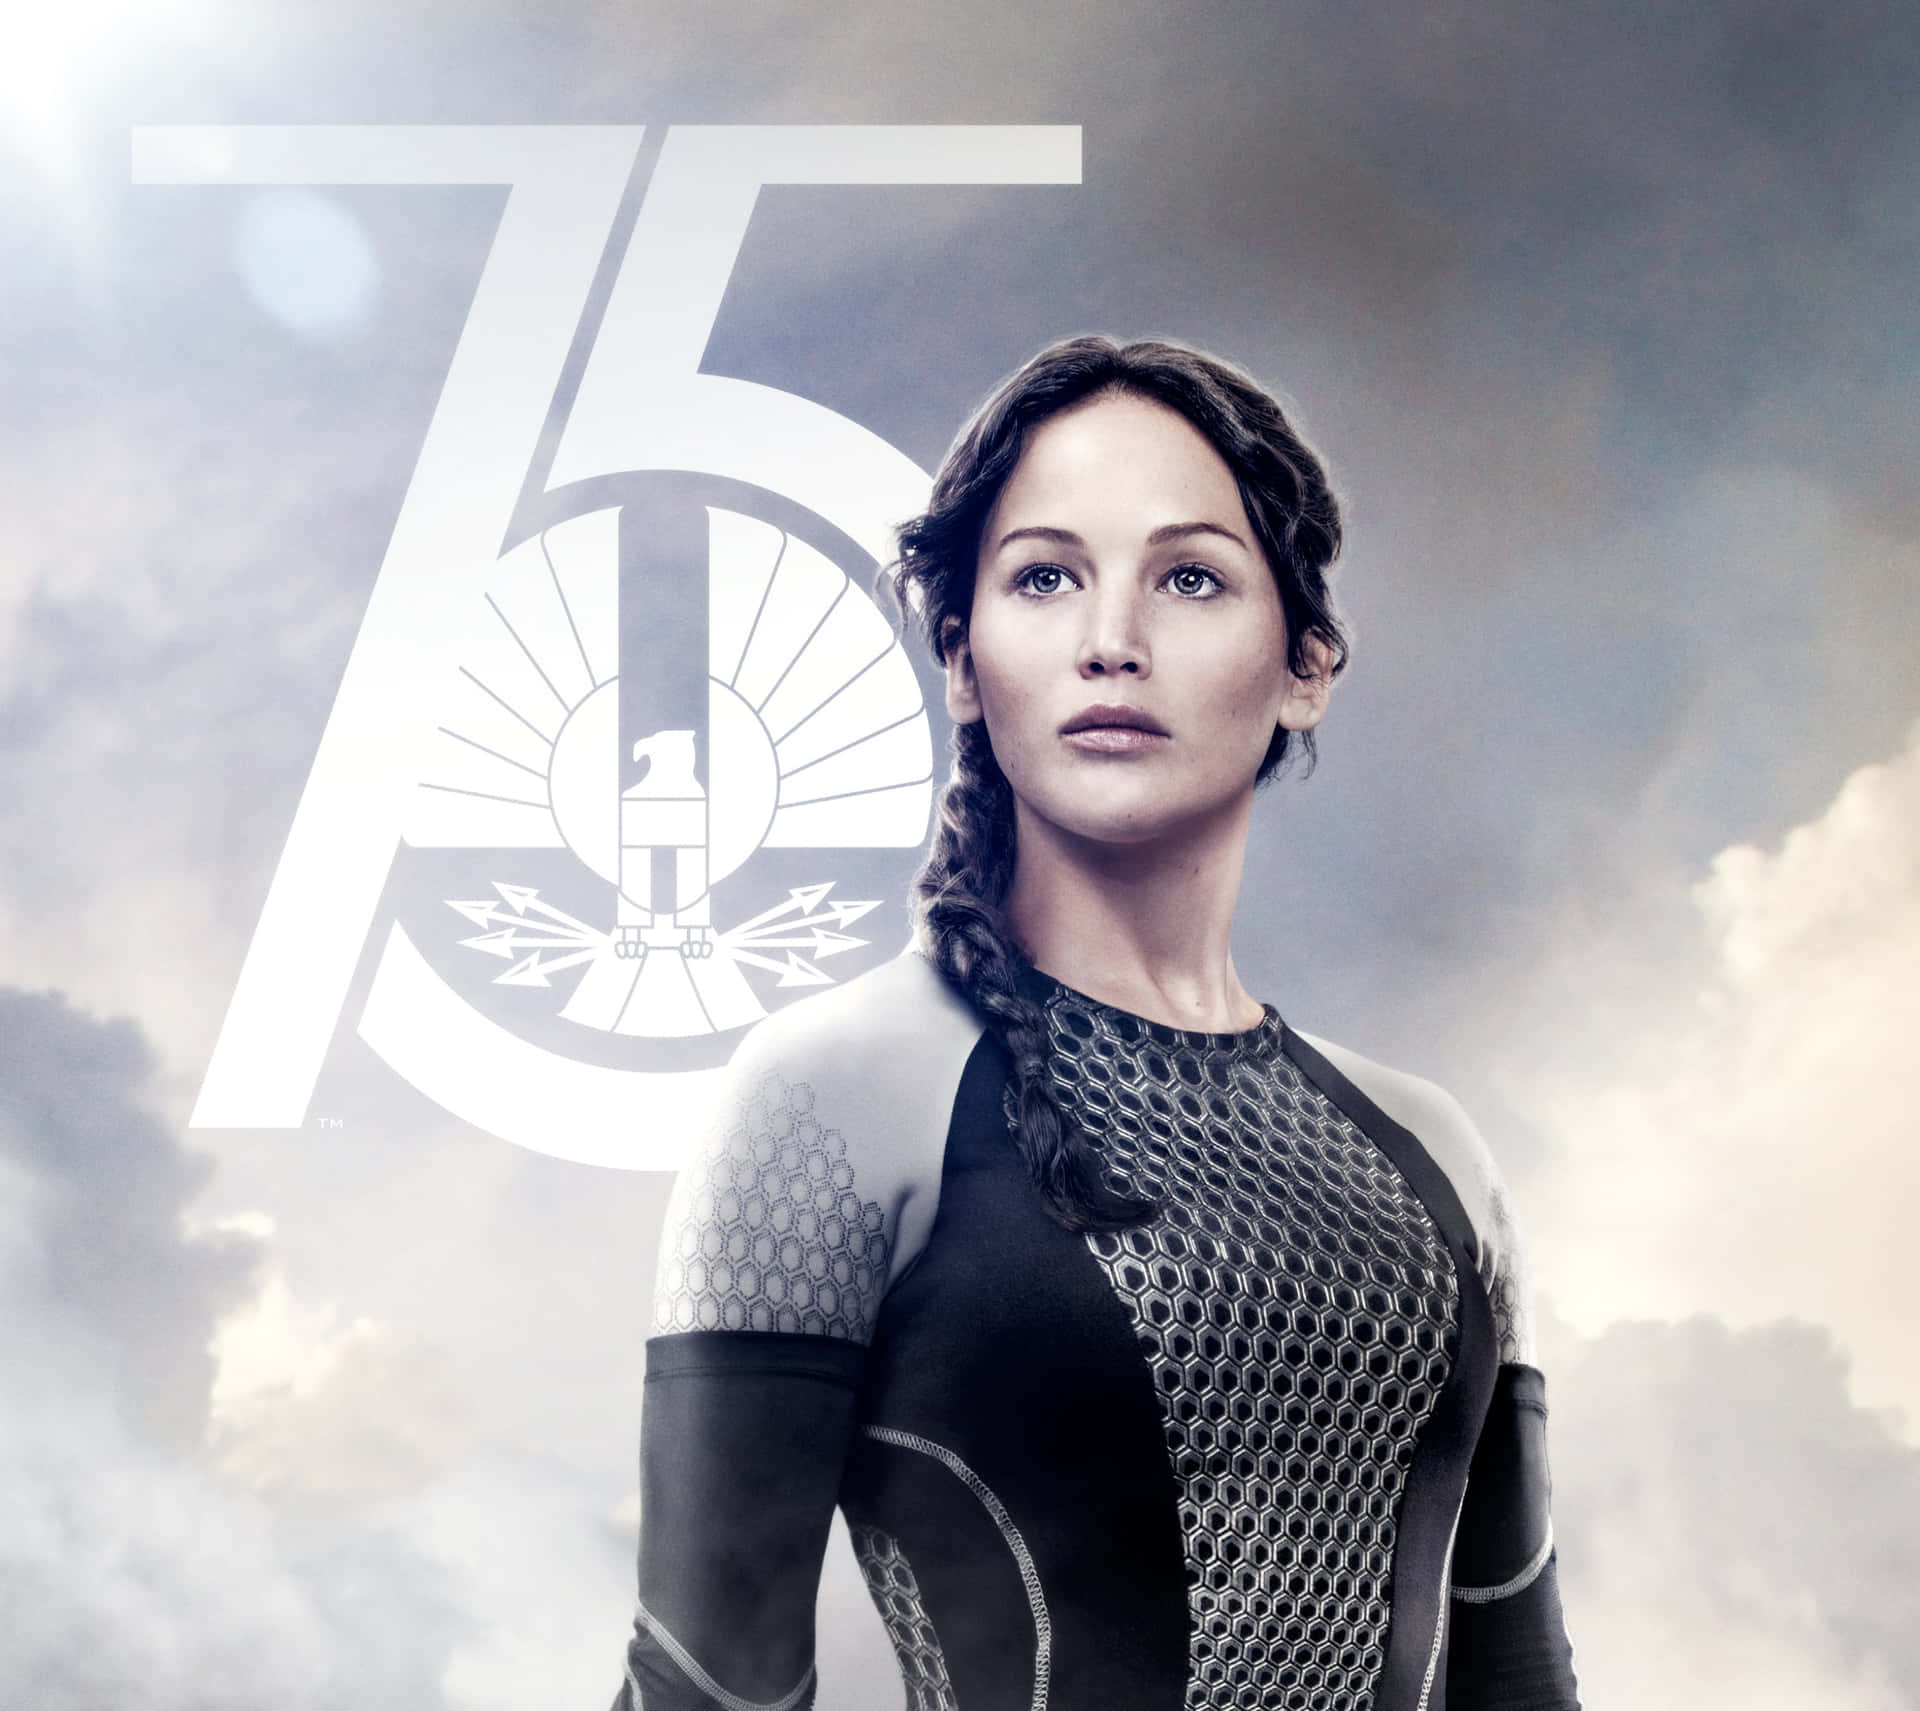 Katniss Everdeen fights for her freedom in The Hunger Games